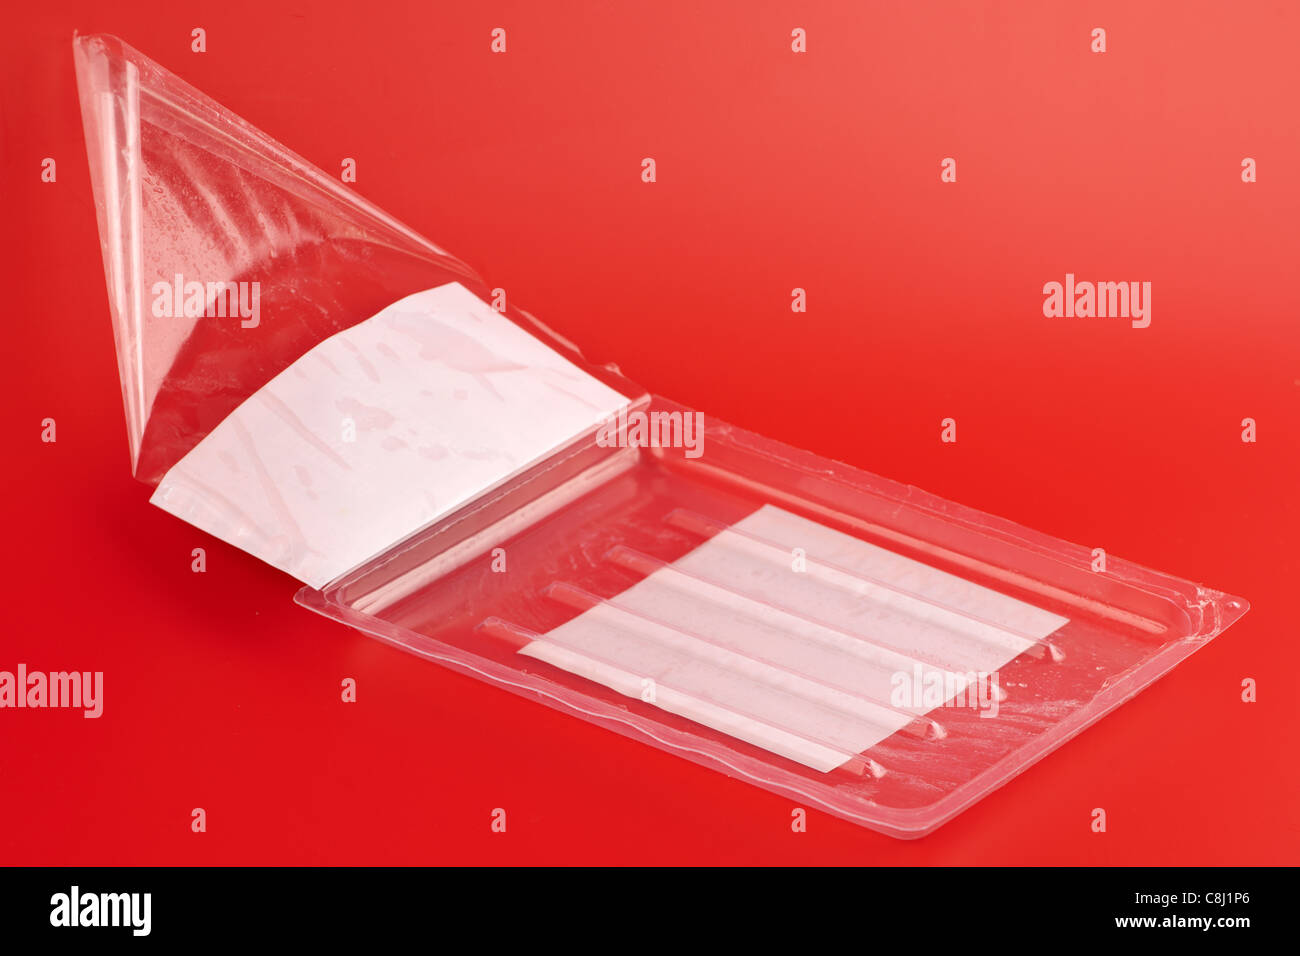 Empty clear plastic packaging tray for rashers of bacon Stock Photo